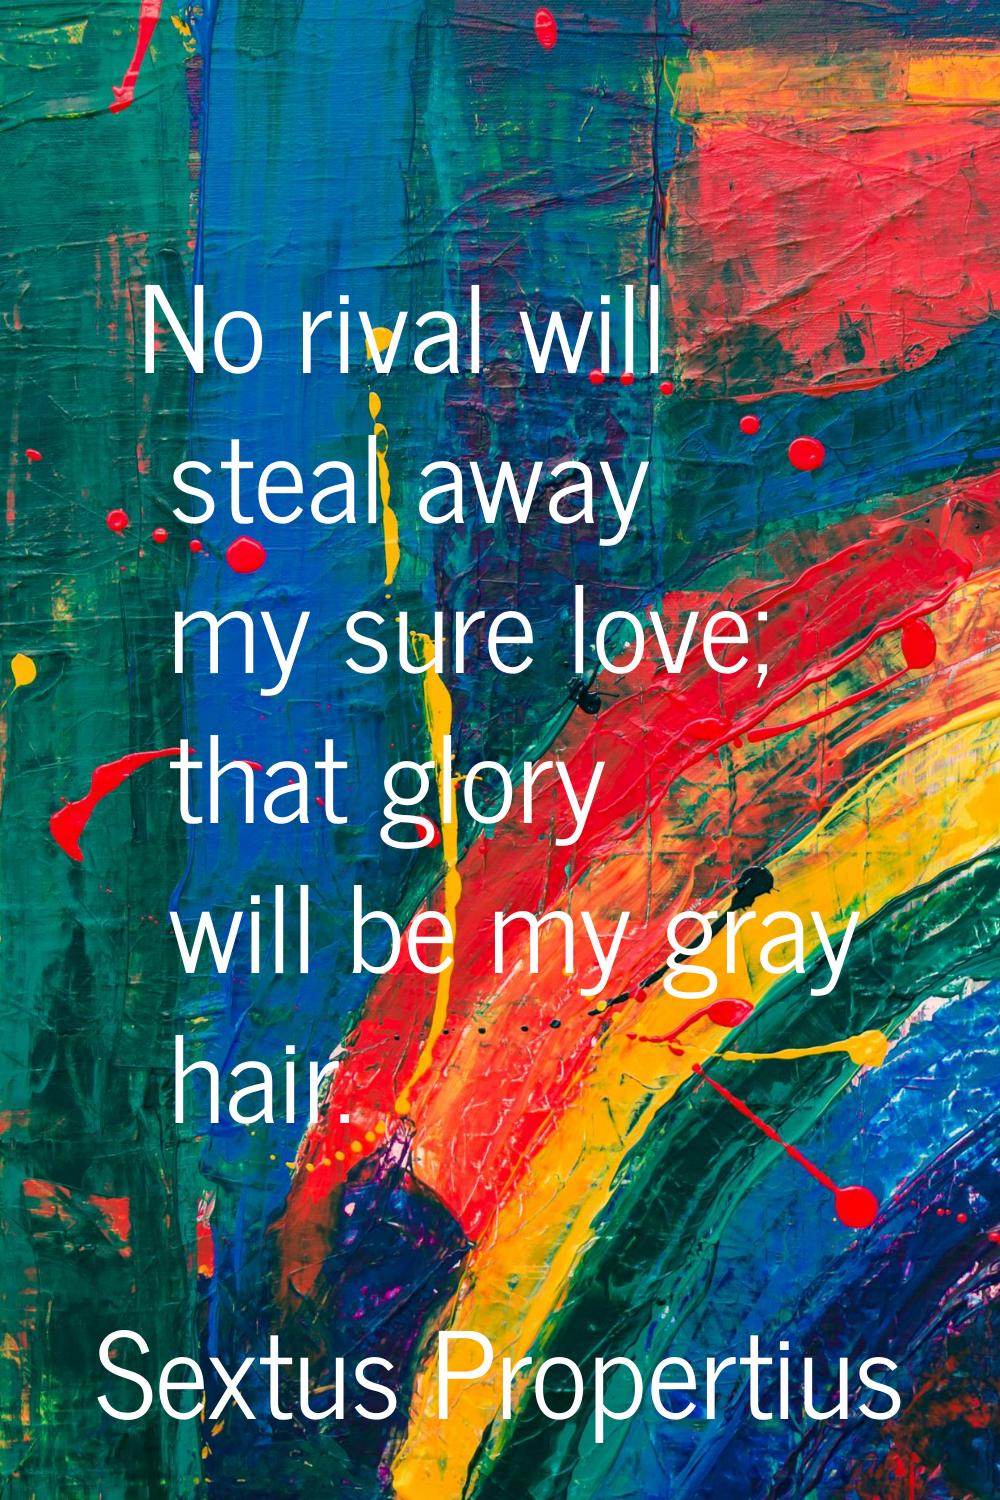 No rival will steal away my sure love; that glory will be my gray hair.